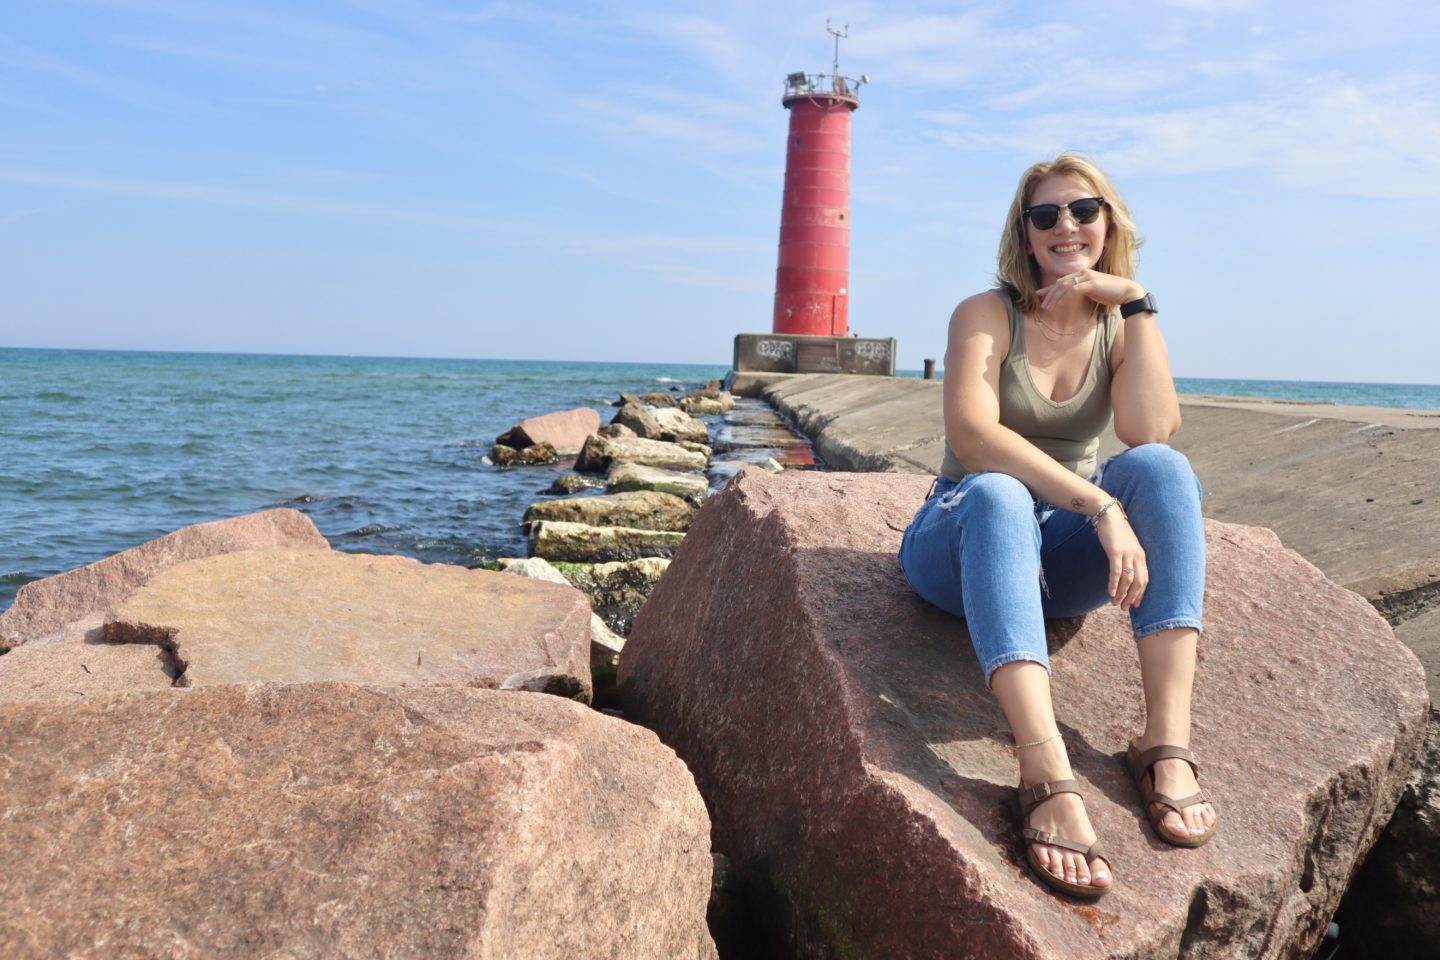 In front of Sheboygan's light house